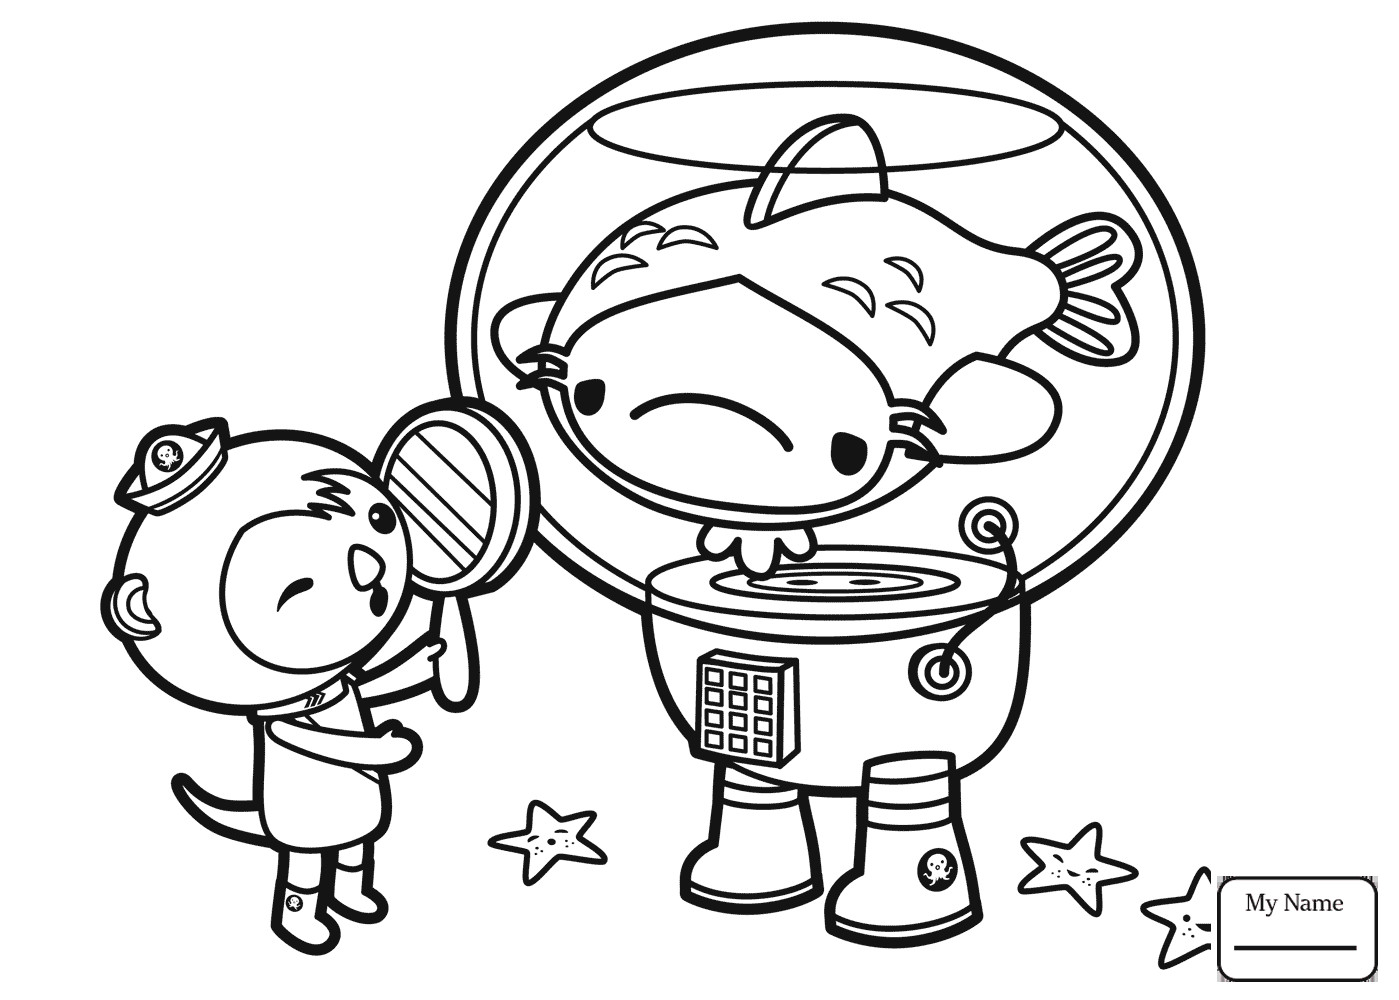 Octonauts Gups Coloring Pages at GetColorings.com   Free ...